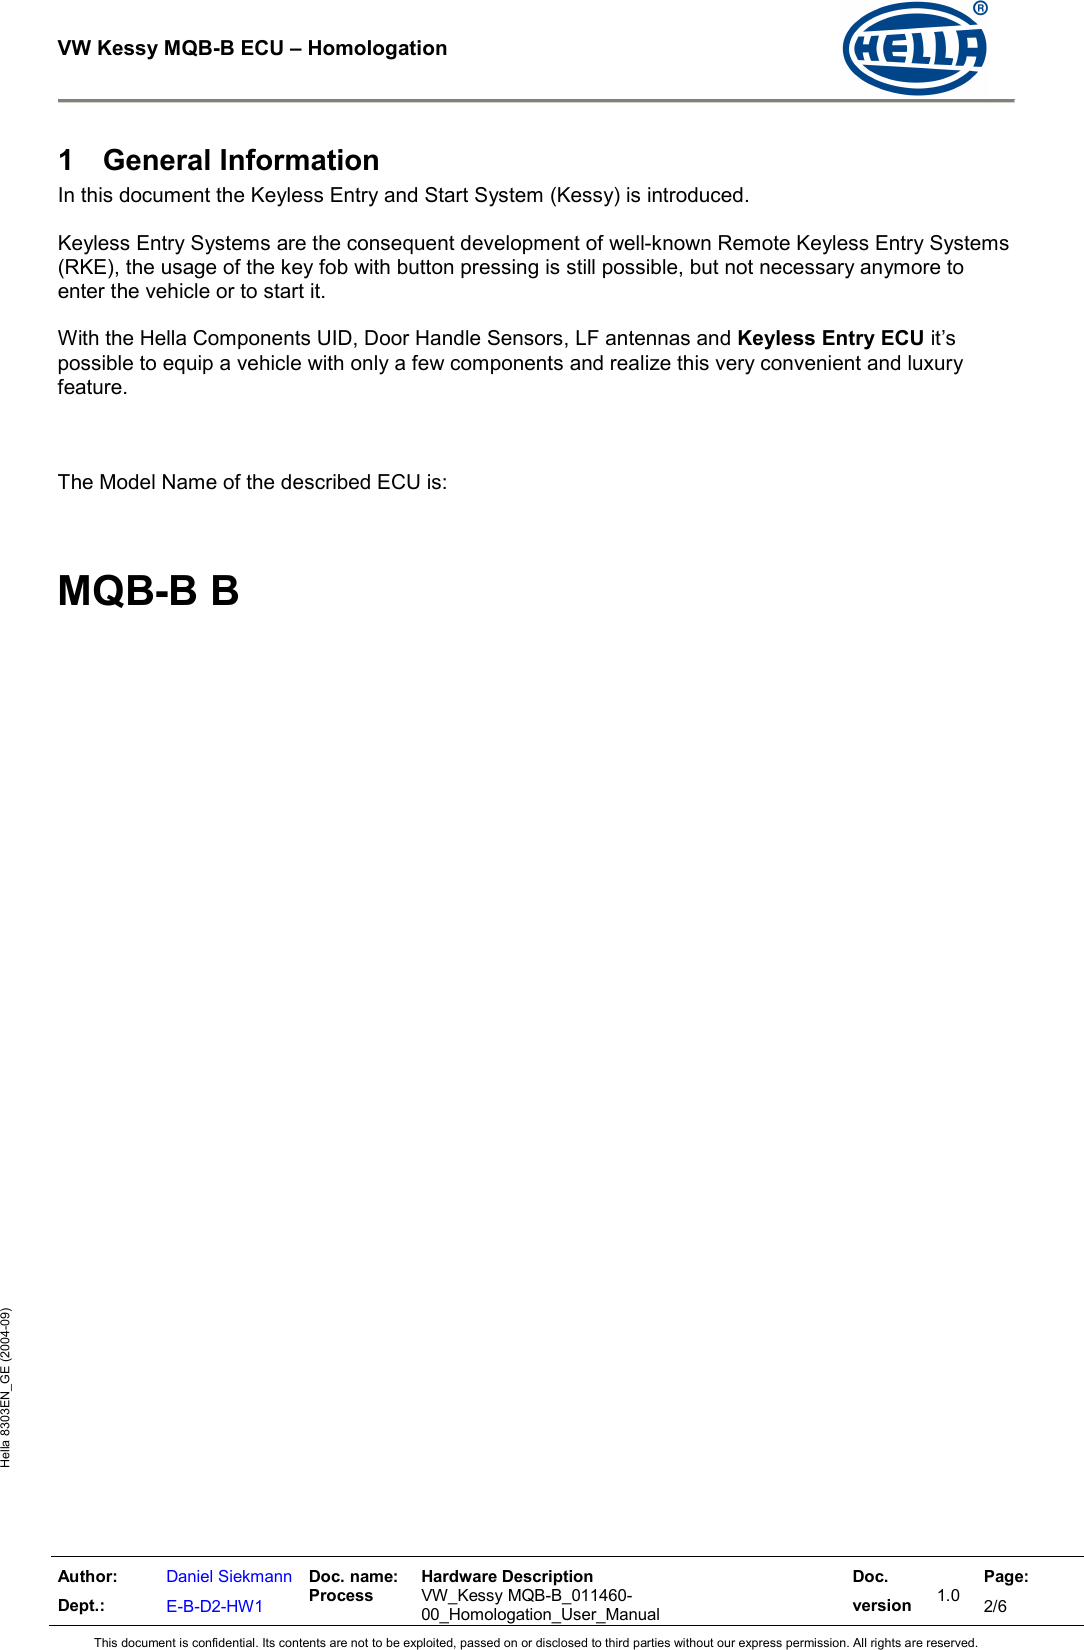  VW Kessy MQB-B ECU – Homologation    Author: Dept.: Daniel Siekmann E-B-D2-HW1 Doc. name: Process Hardware Description  VW_Kessy MQB-B_011460-00_Homologation_User_Manual Doc. version 1.0 Page: 2/6 This document is confidential. Its contents are not to be exploited, passed on or disclosed to third parties without our express permission. All rights are reserved. Hella 8303EN_GE (2004-09) 1  General Information In this document the Keyless Entry and Start System (Kessy) is introduced.  Keyless Entry Systems are the consequent development of well-known Remote Keyless Entry Systems (RKE), the usage of the key fob with button pressing is still possible, but not necessary anymore to enter the vehicle or to start it.  With the Hella Components UID, Door Handle Sensors, LF antennas and Keyless Entry ECU it’s possible to equip a vehicle with only a few components and realize this very convenient and luxury feature.    The Model Name of the described ECU is:    MQB-B B    